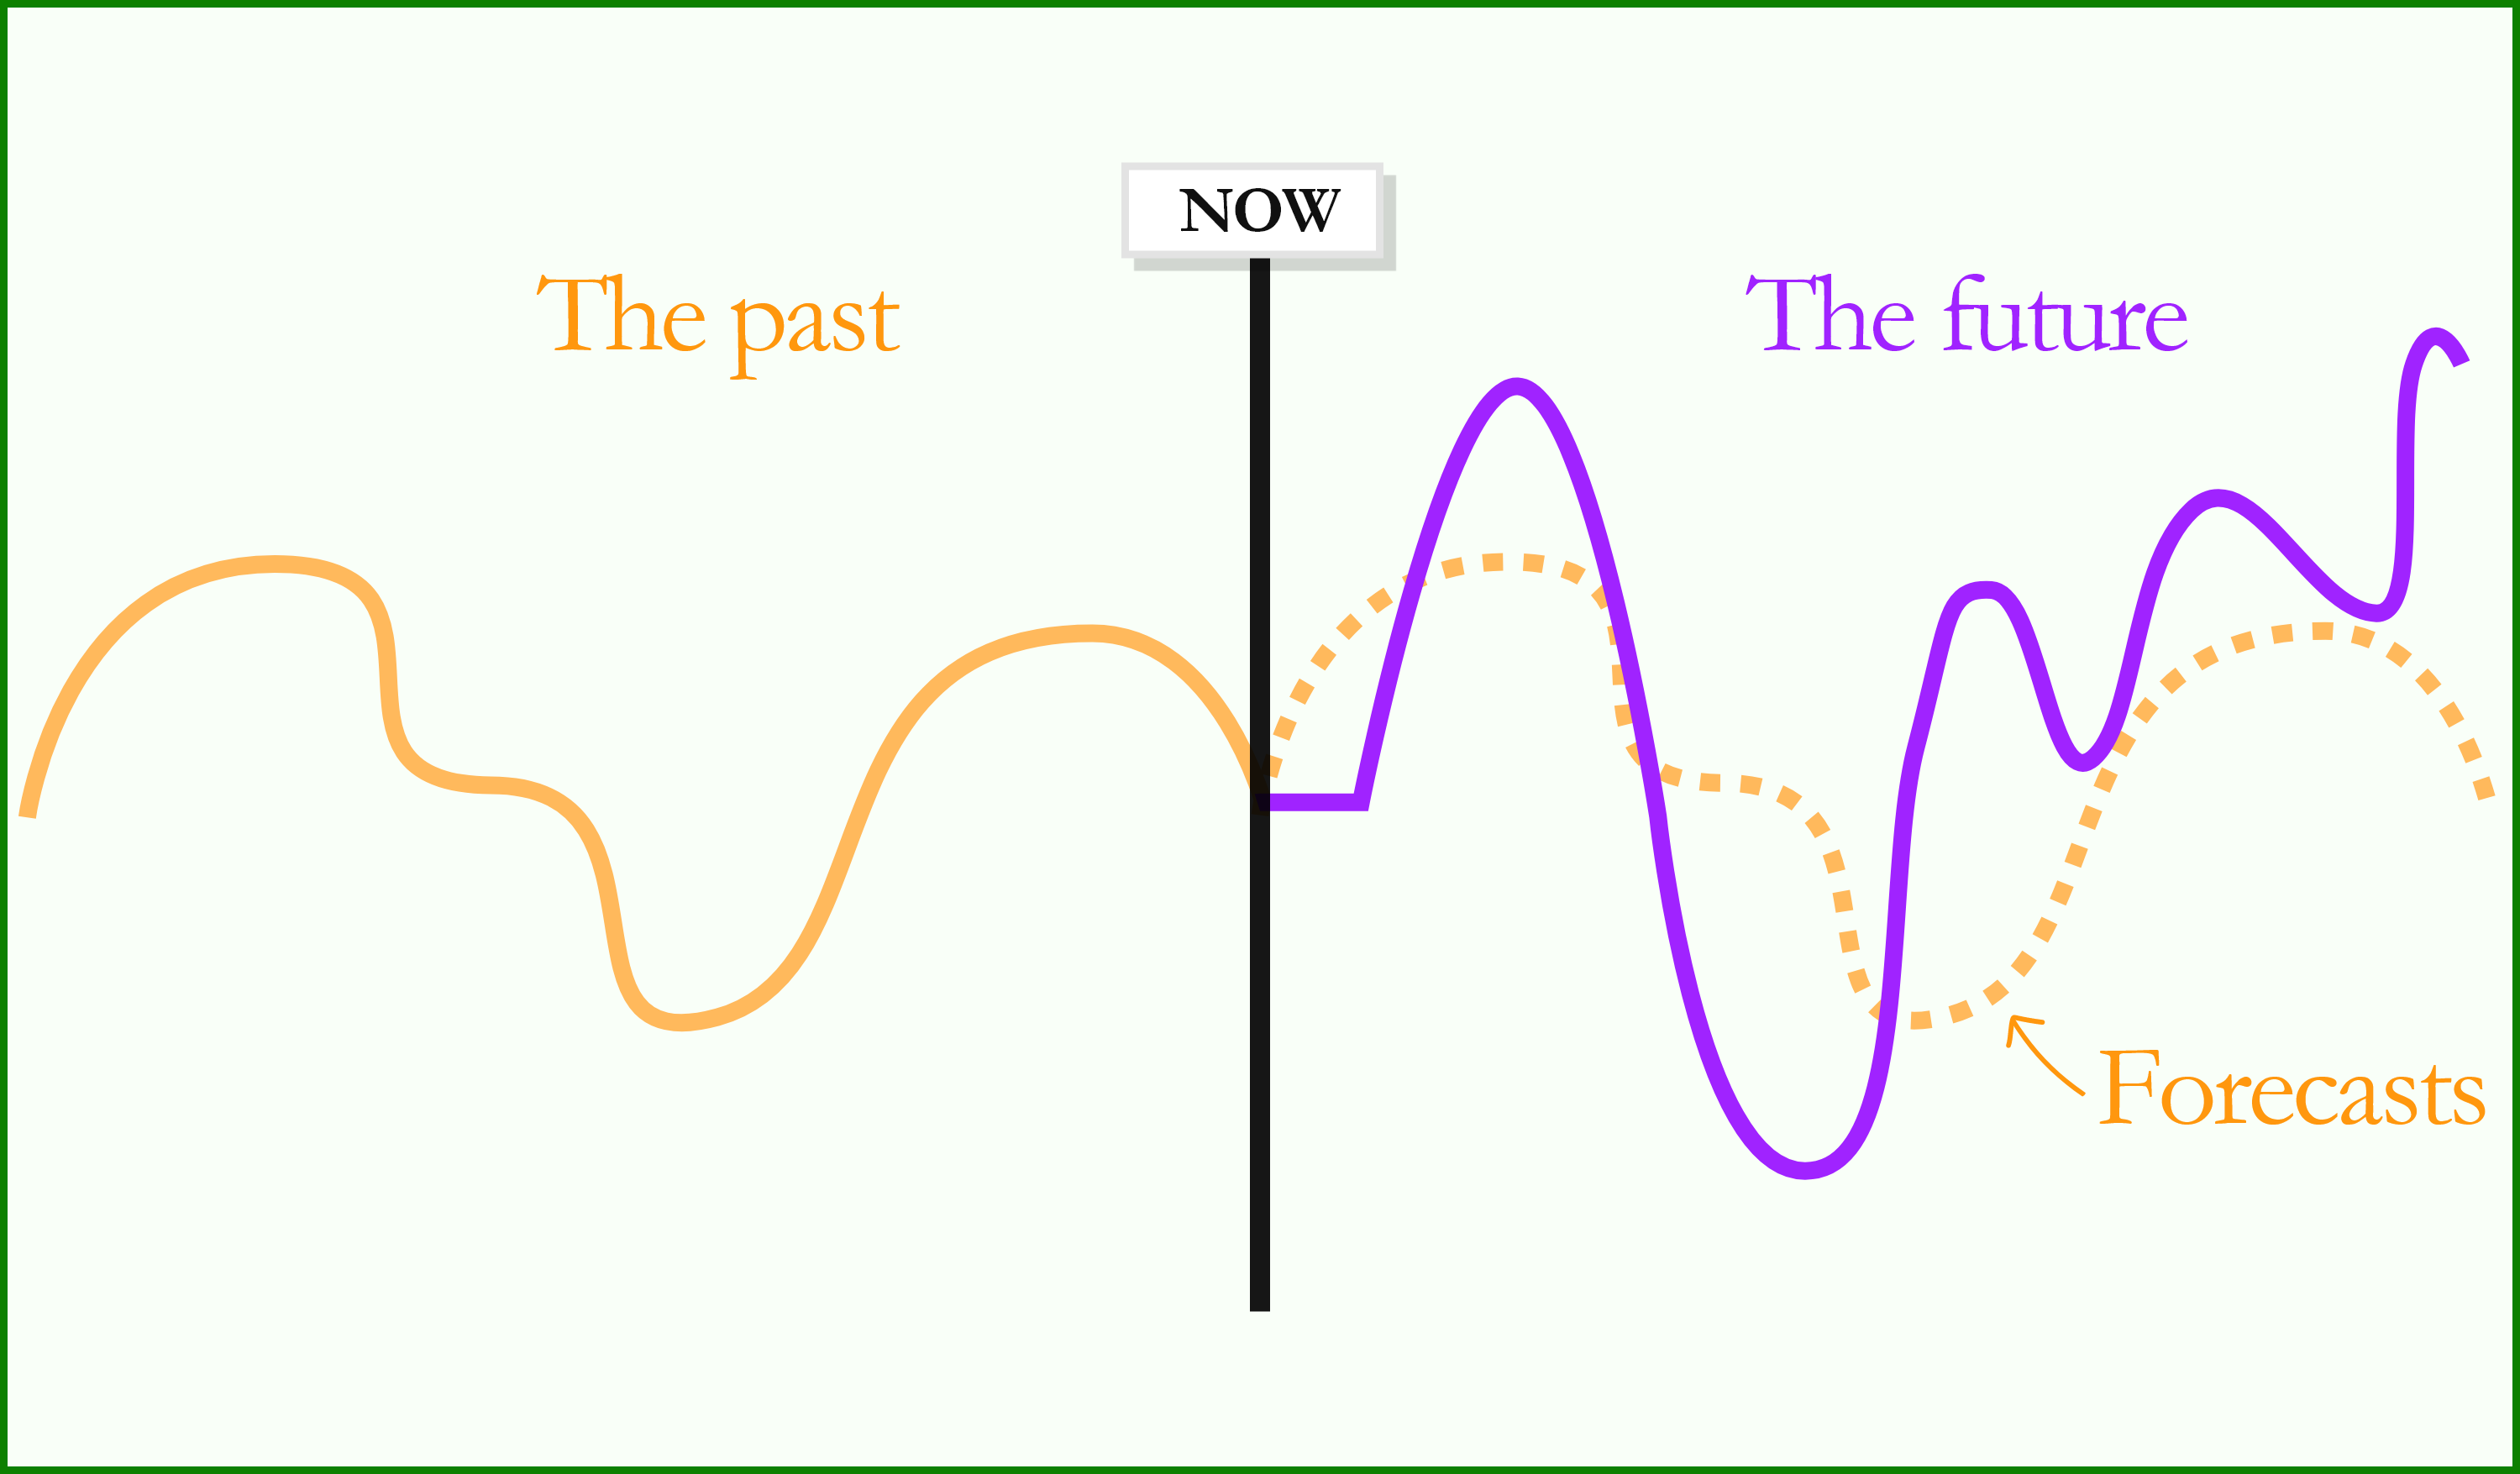 Forecast graph that repeats the past that is different from the future graph